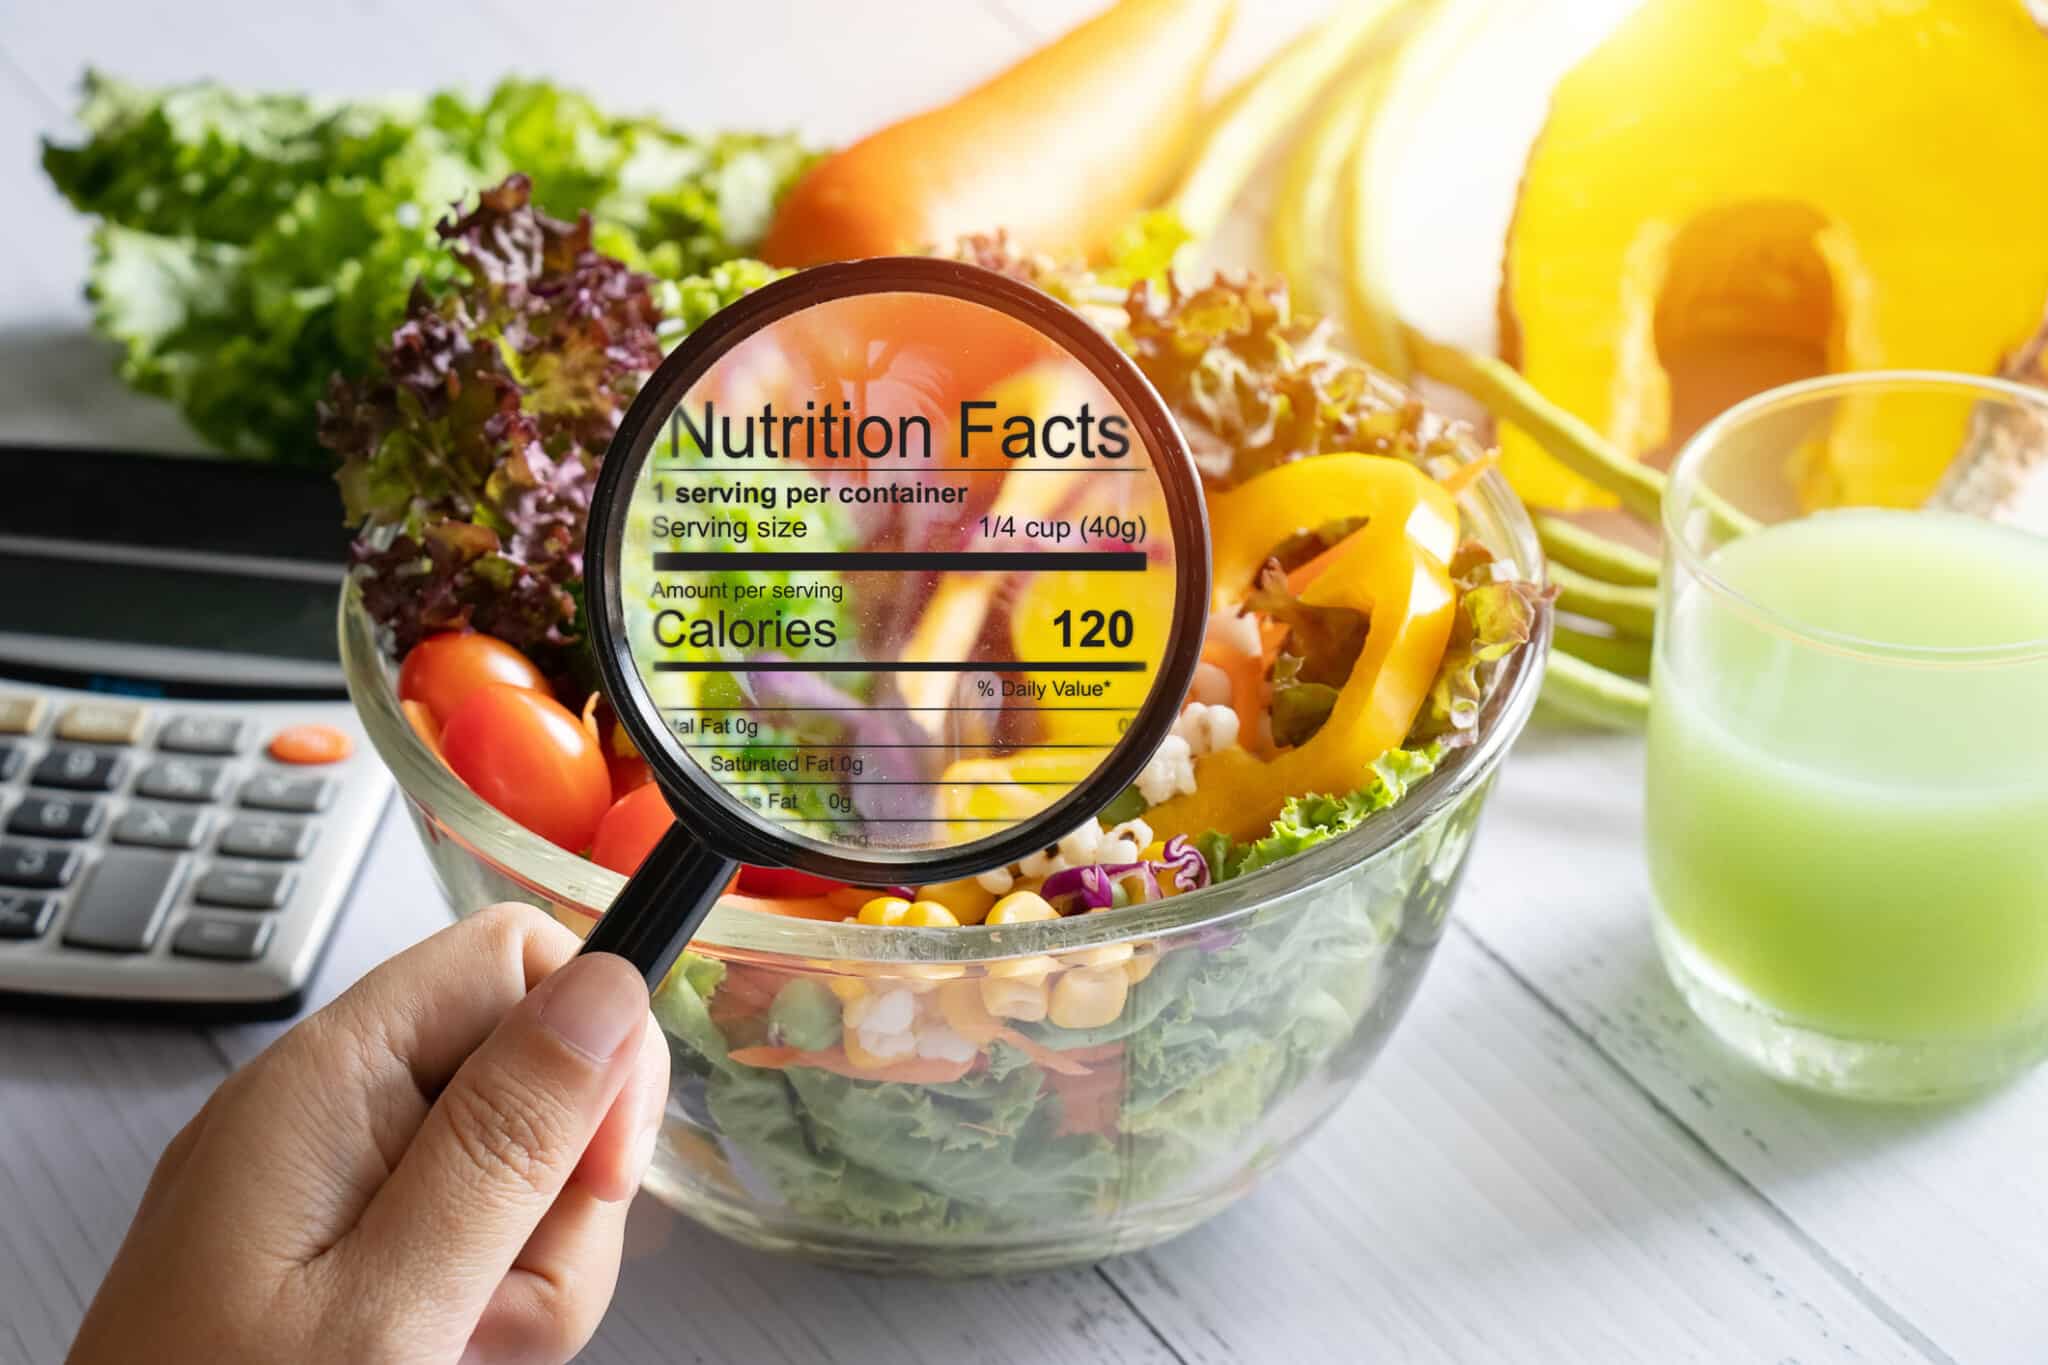 Hand holds magnifying glass over a salad with nutrition facts showing in the magnifying glass.